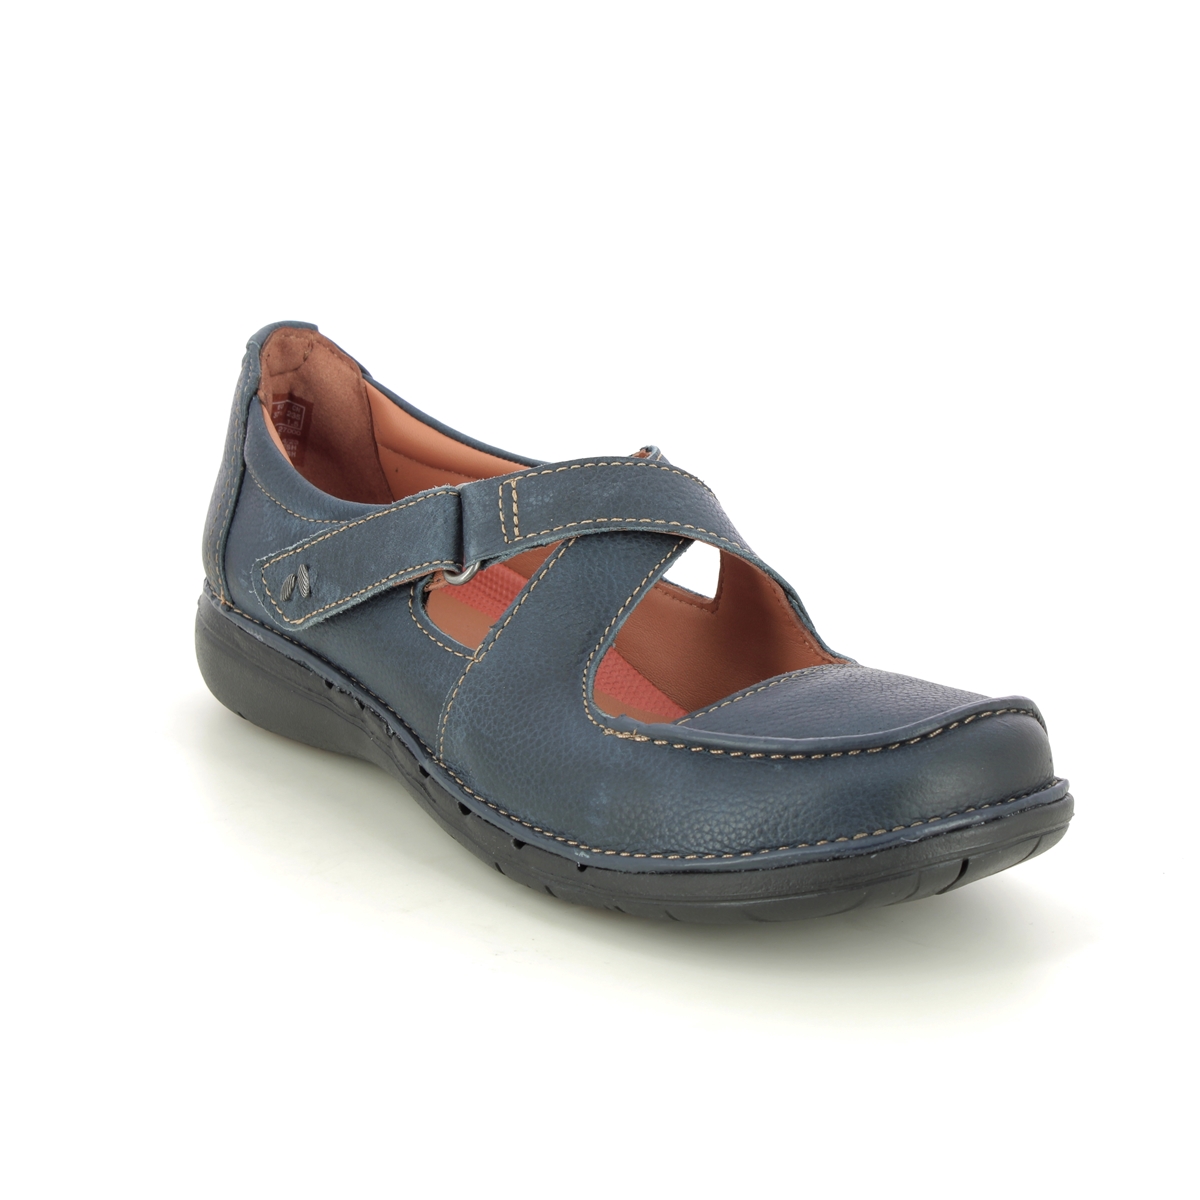 Clarks Un Loop Strap Navy Leather Womens Mary Jane Shoes 749724D In Size 6 In Plain Navy Leather